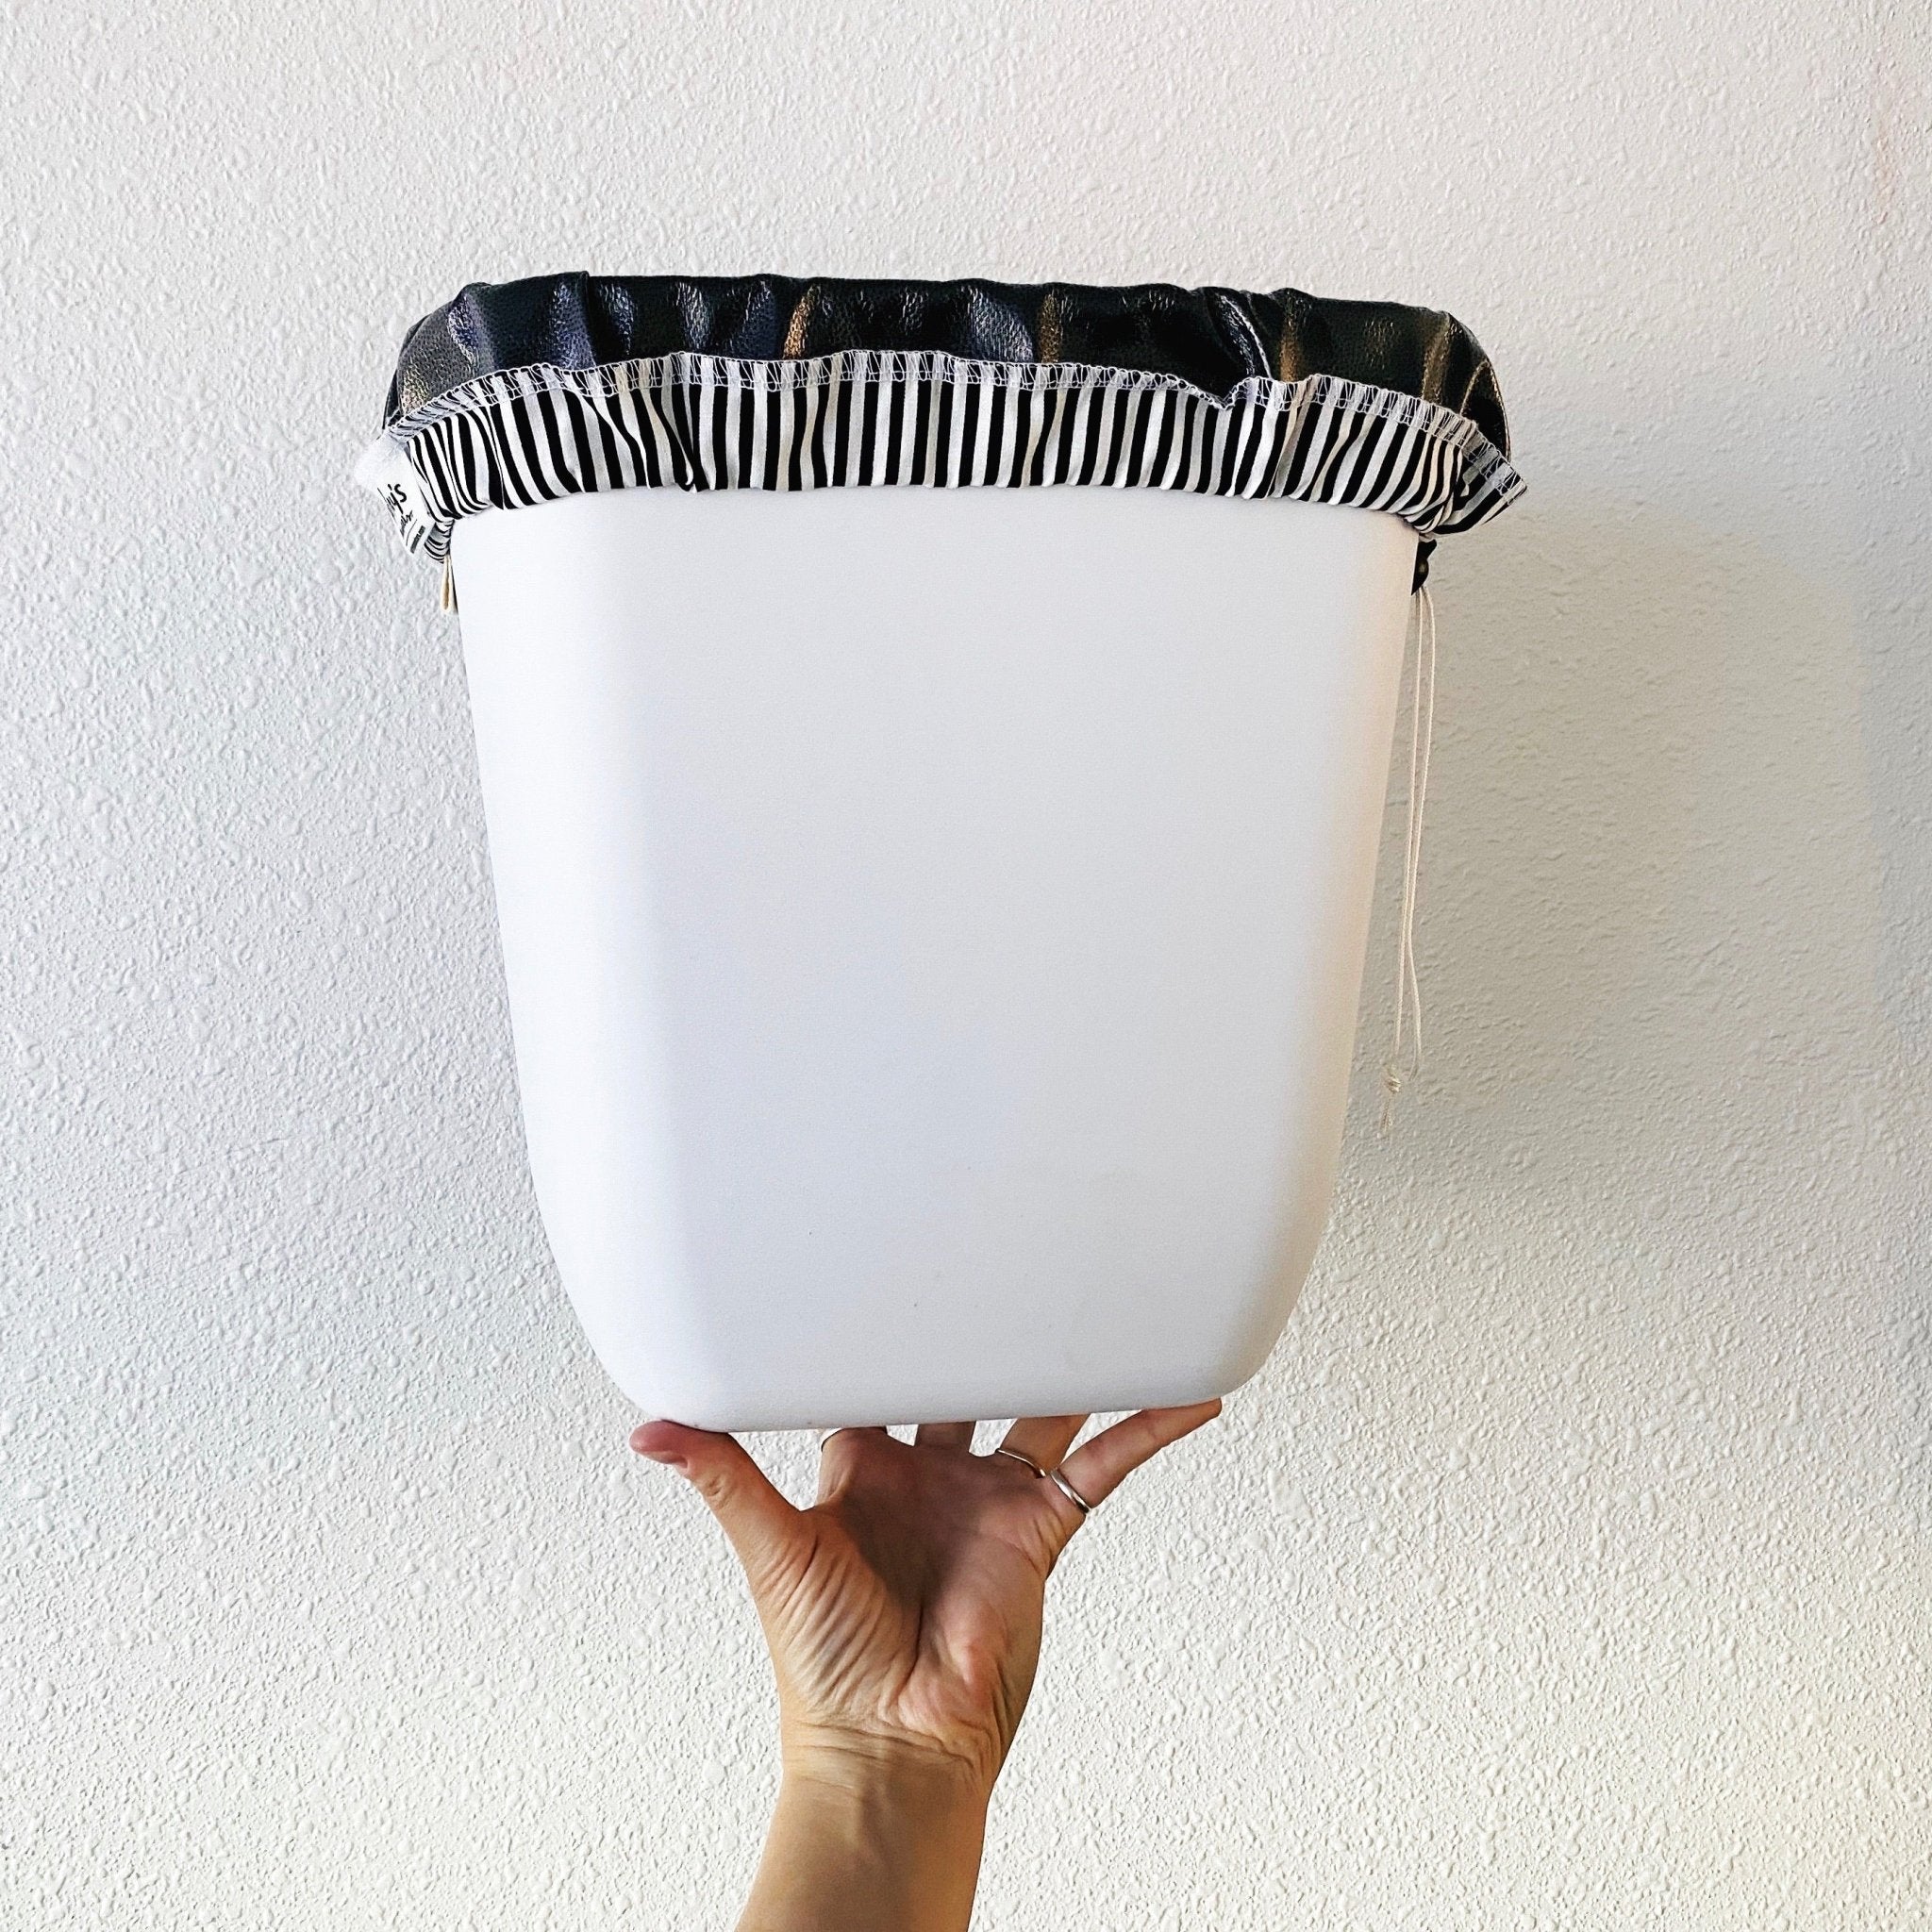 I like this idea. washable liner for your recycling bin.